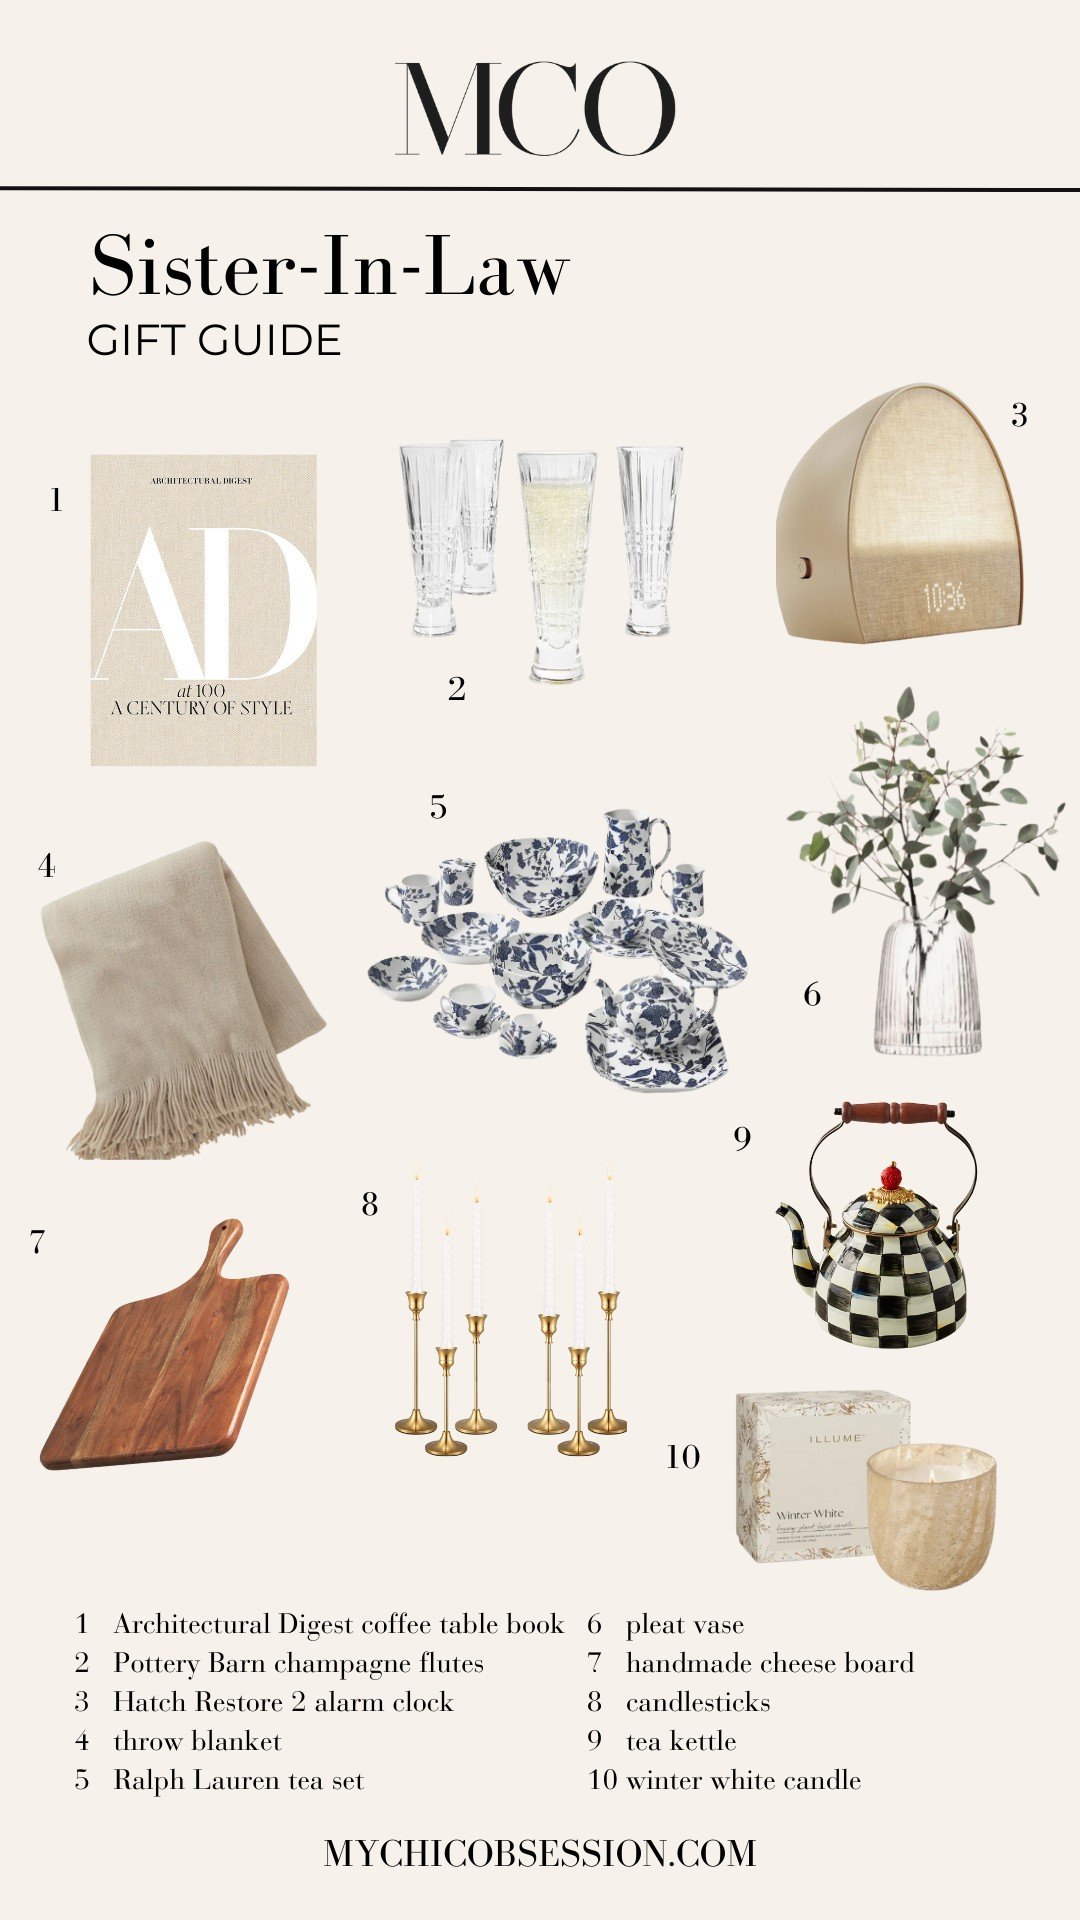 Gifts your sister-in-law who loves interior design